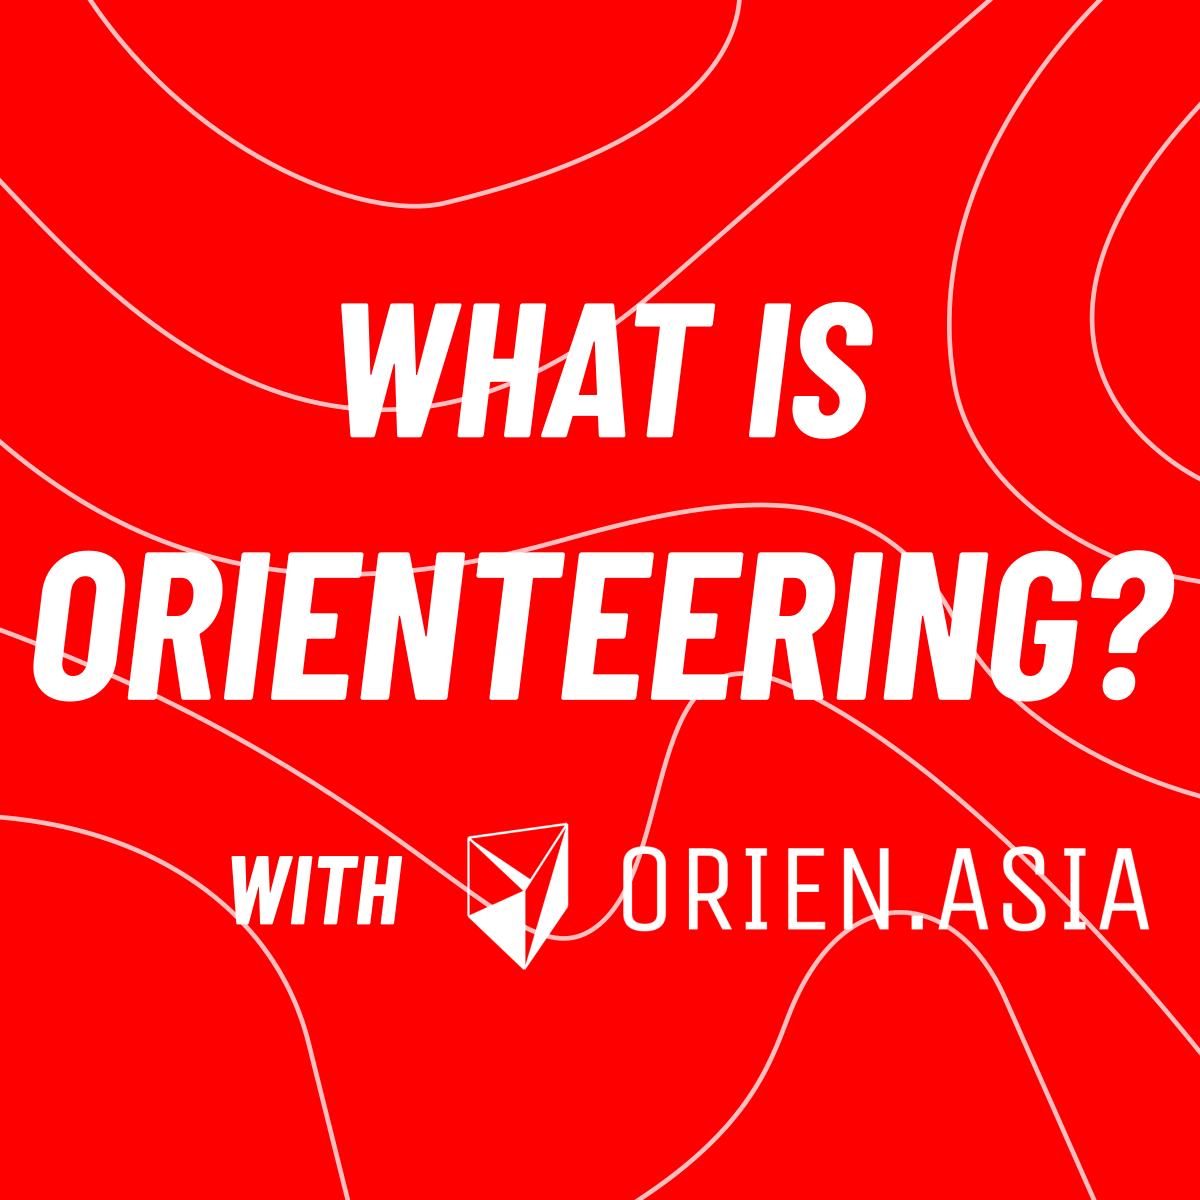 What is orienteering? With ORIEN.ASIA